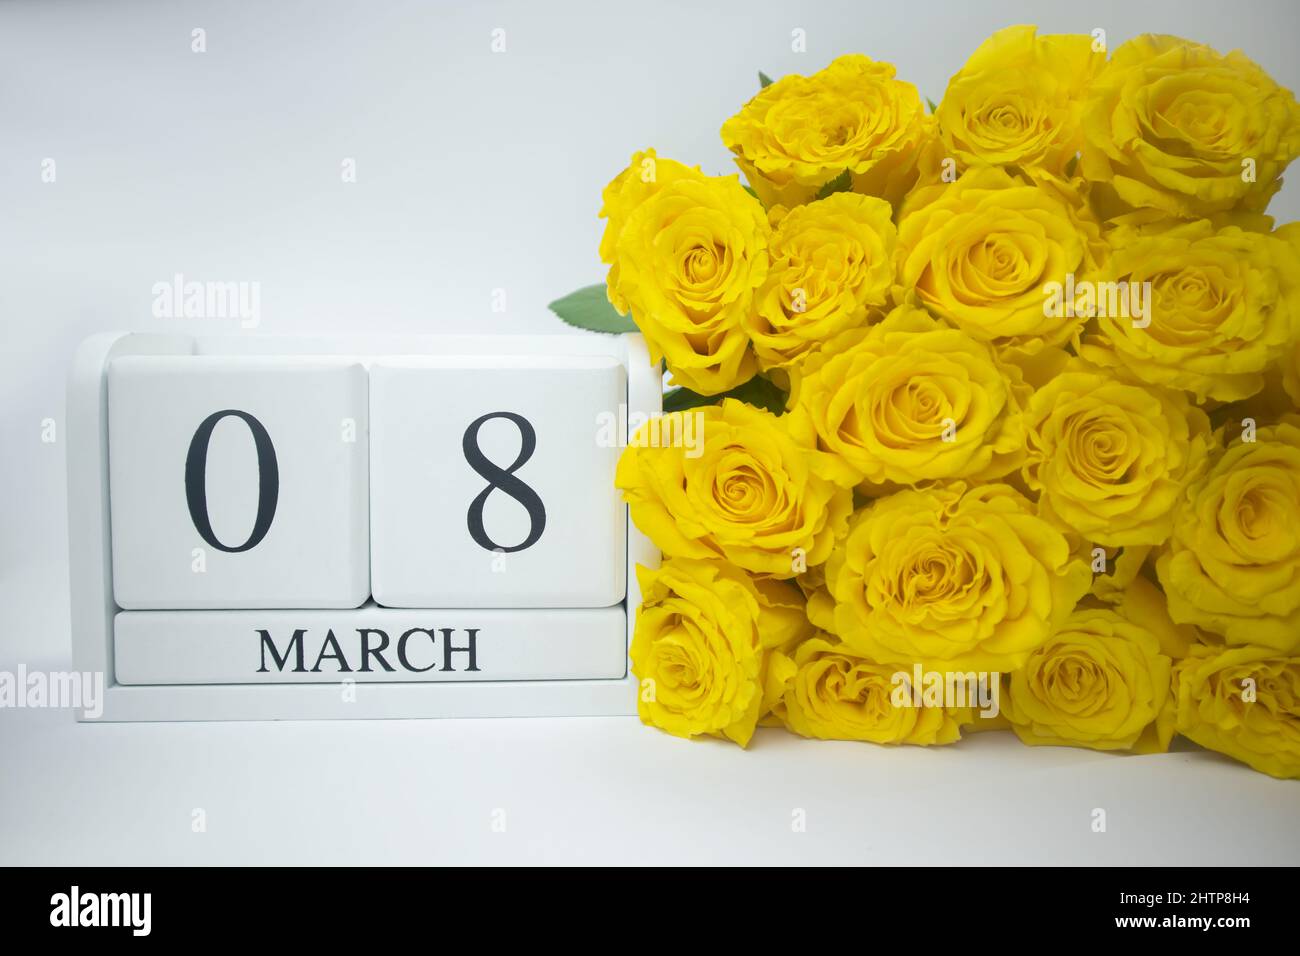 Wooden calendar March 8 and yellow roses on a white background.  Stock Photo